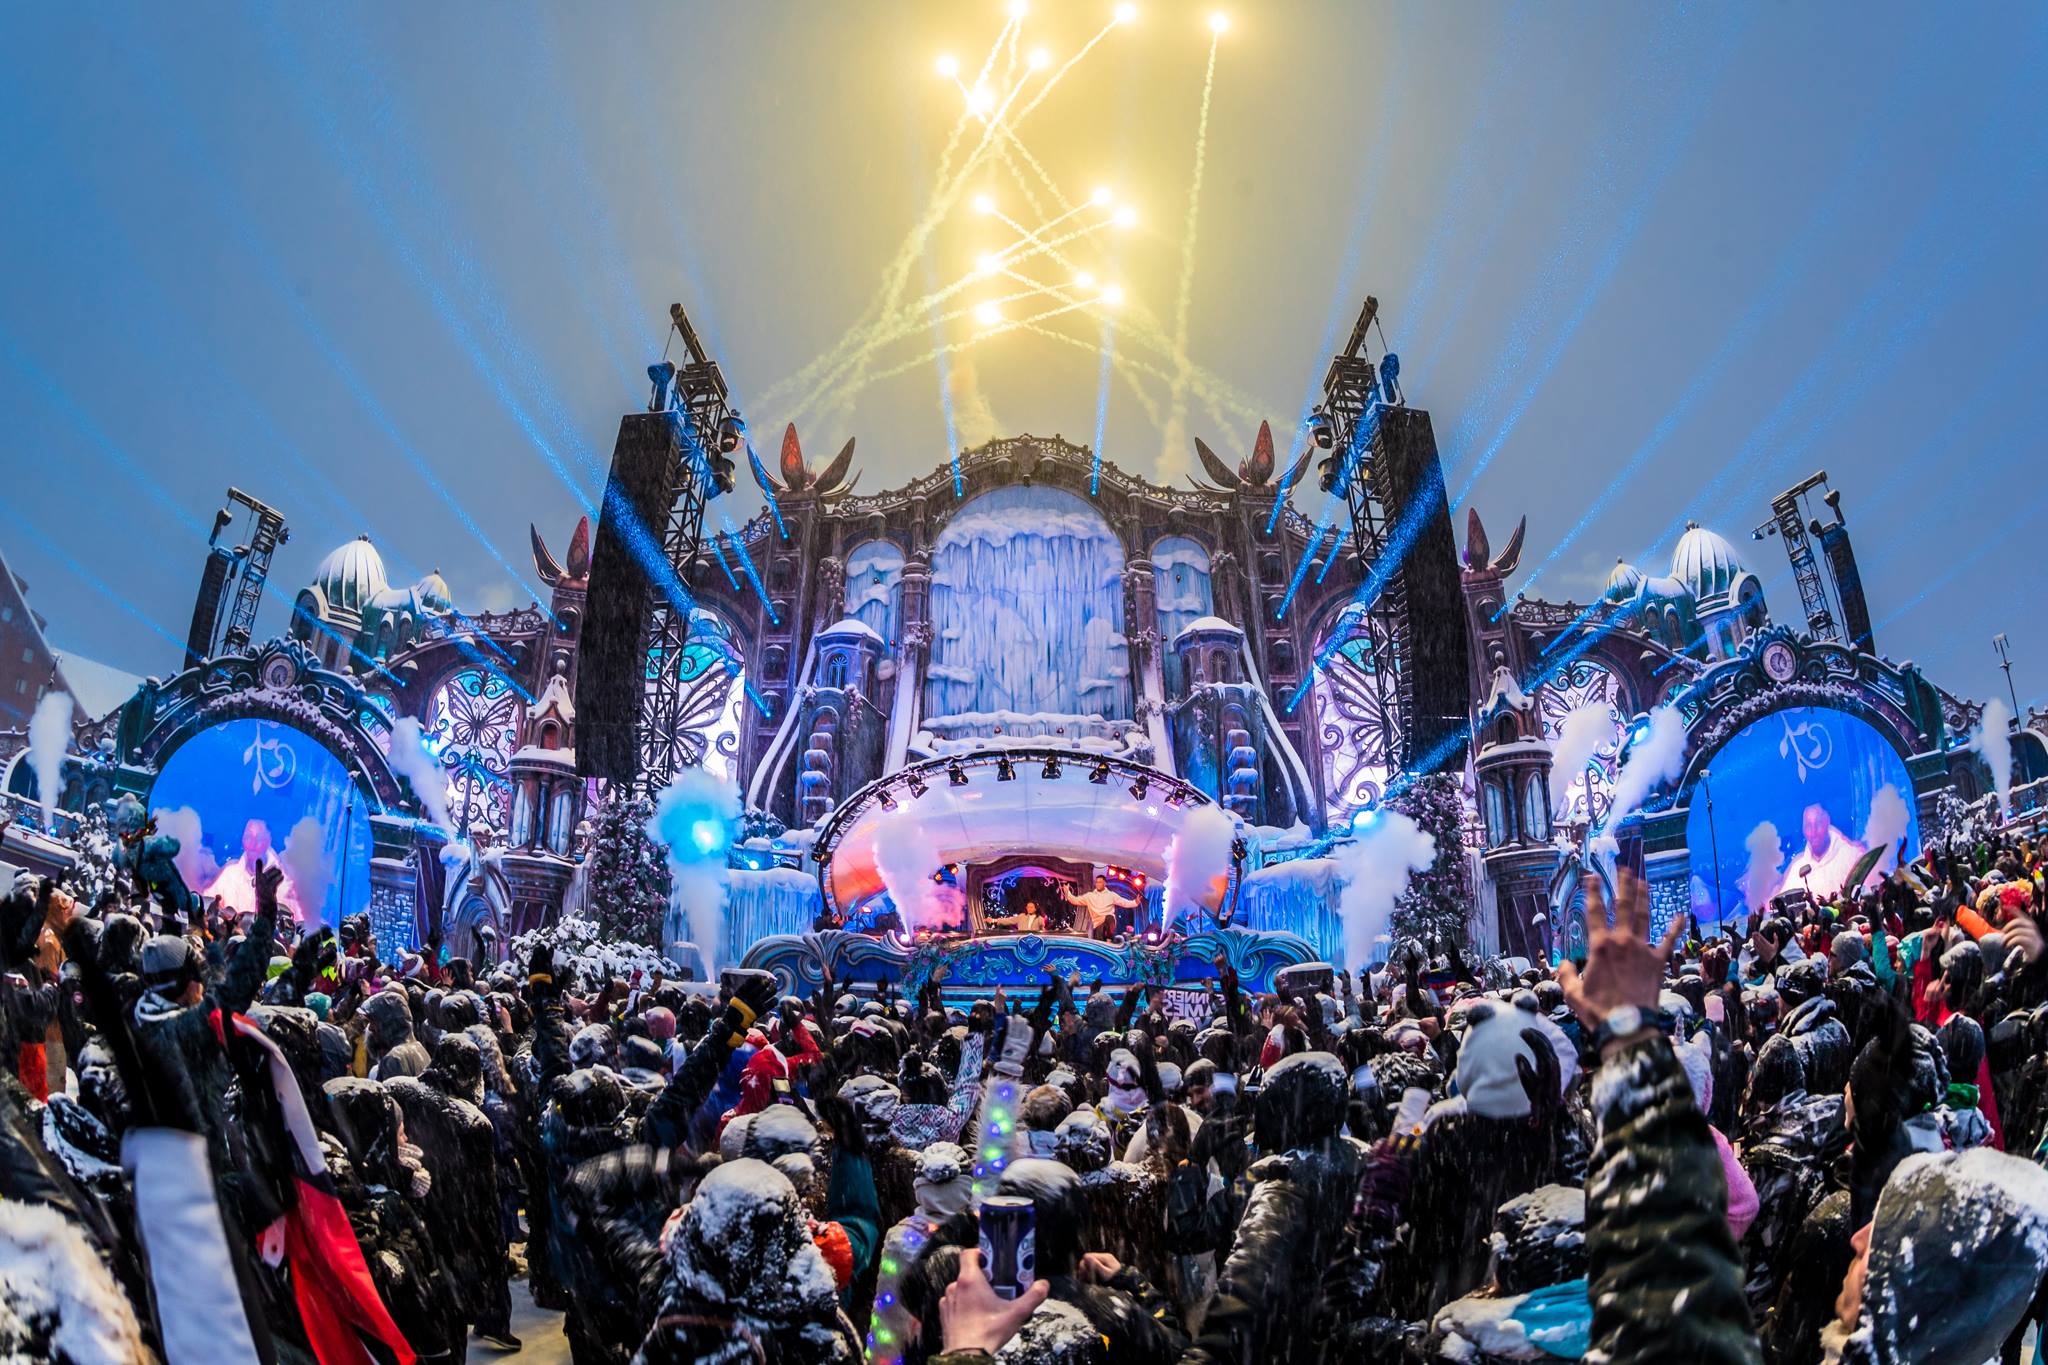 Guess who’s playing at Tomorrowland Winter?